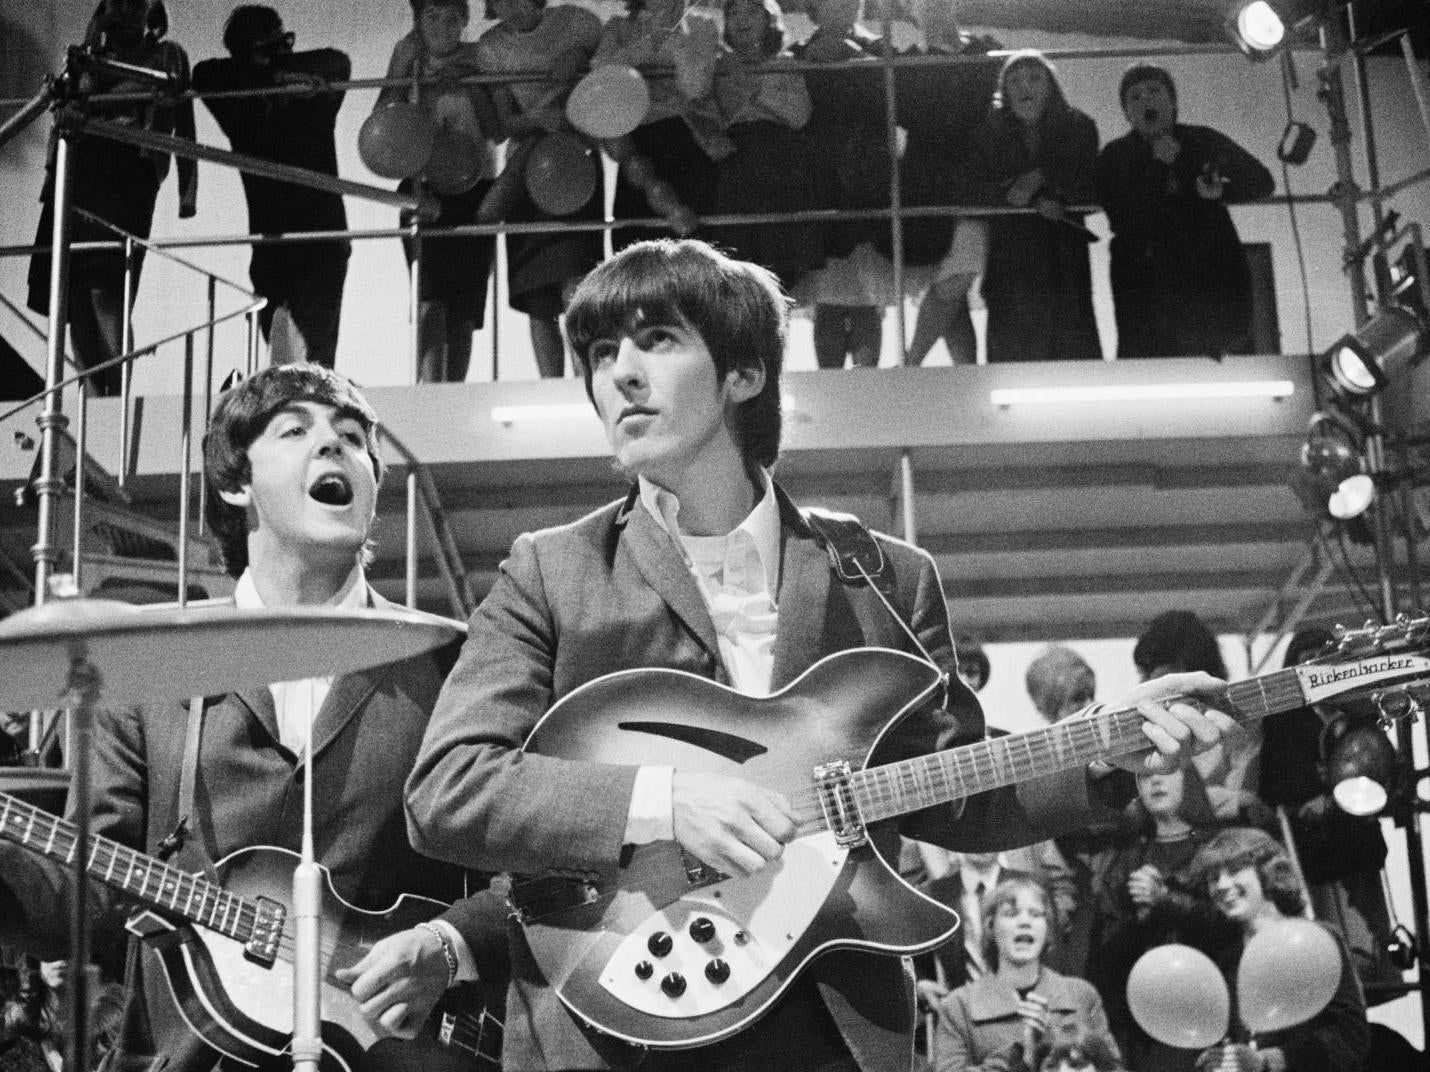 Antiques Roadshow: Guitar once owned by George Harrison and John Lennon valued at up to £400,000